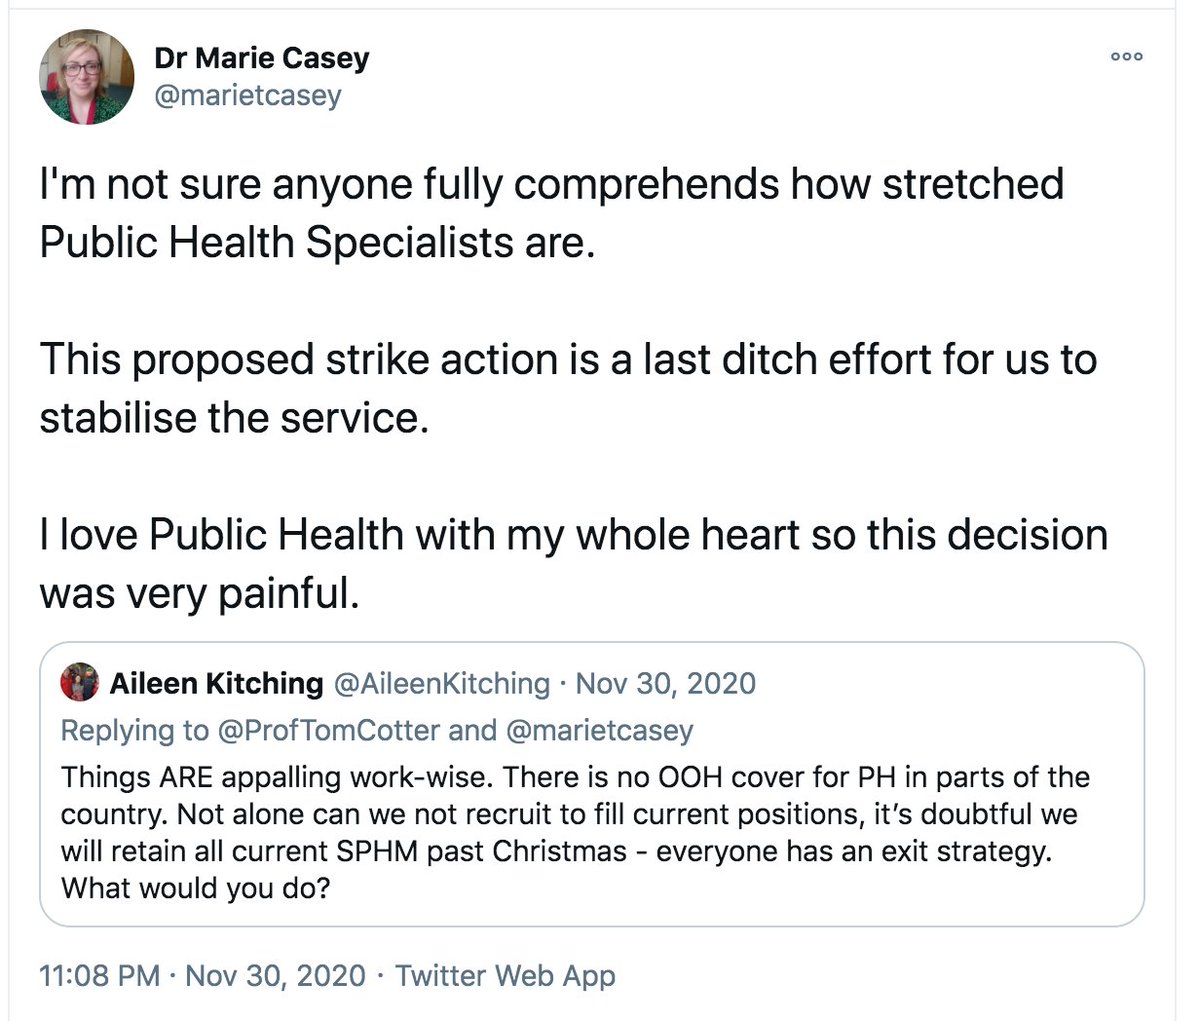 And so, in the middle of a PANDEMIC(!!), we may be facing a public health strike this month.After decades of neglect, pushed beyond the brink, they've simply crumbled.It is painful & difficult, but they are doing this FOR US, in 'a last-ditch effort to stabilise the service'.